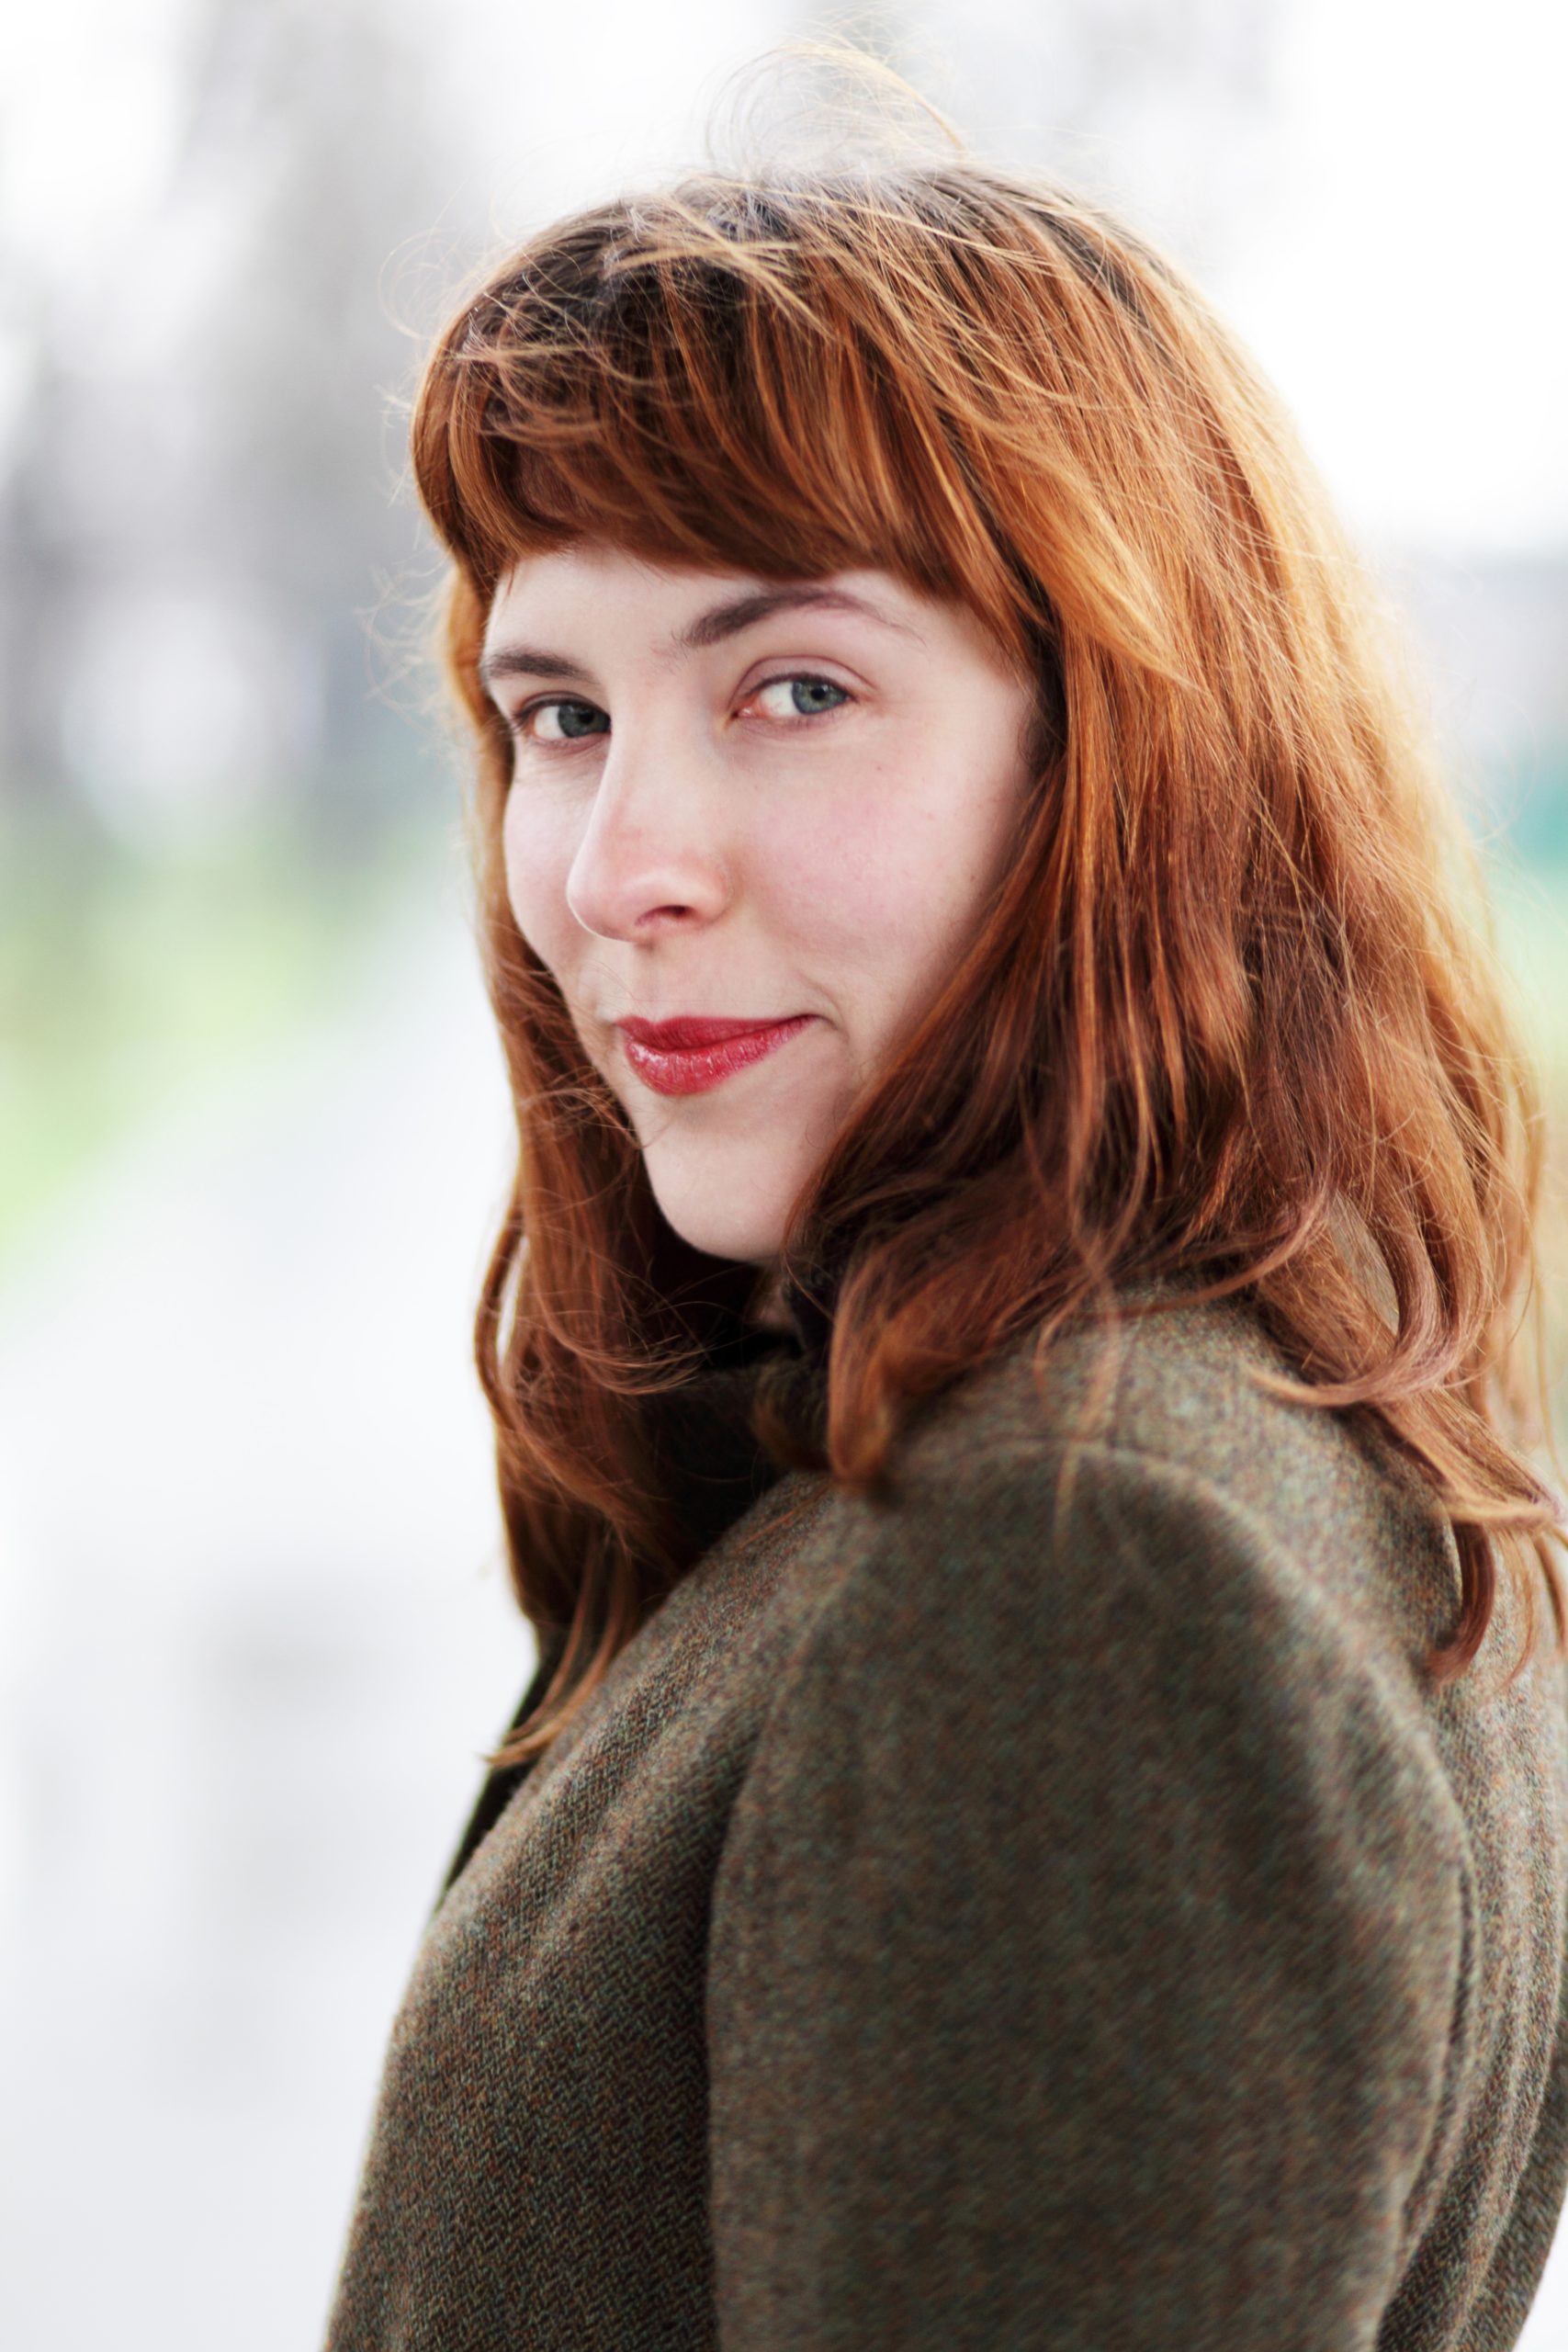 4 Minute Hangout With: Evie Wyld